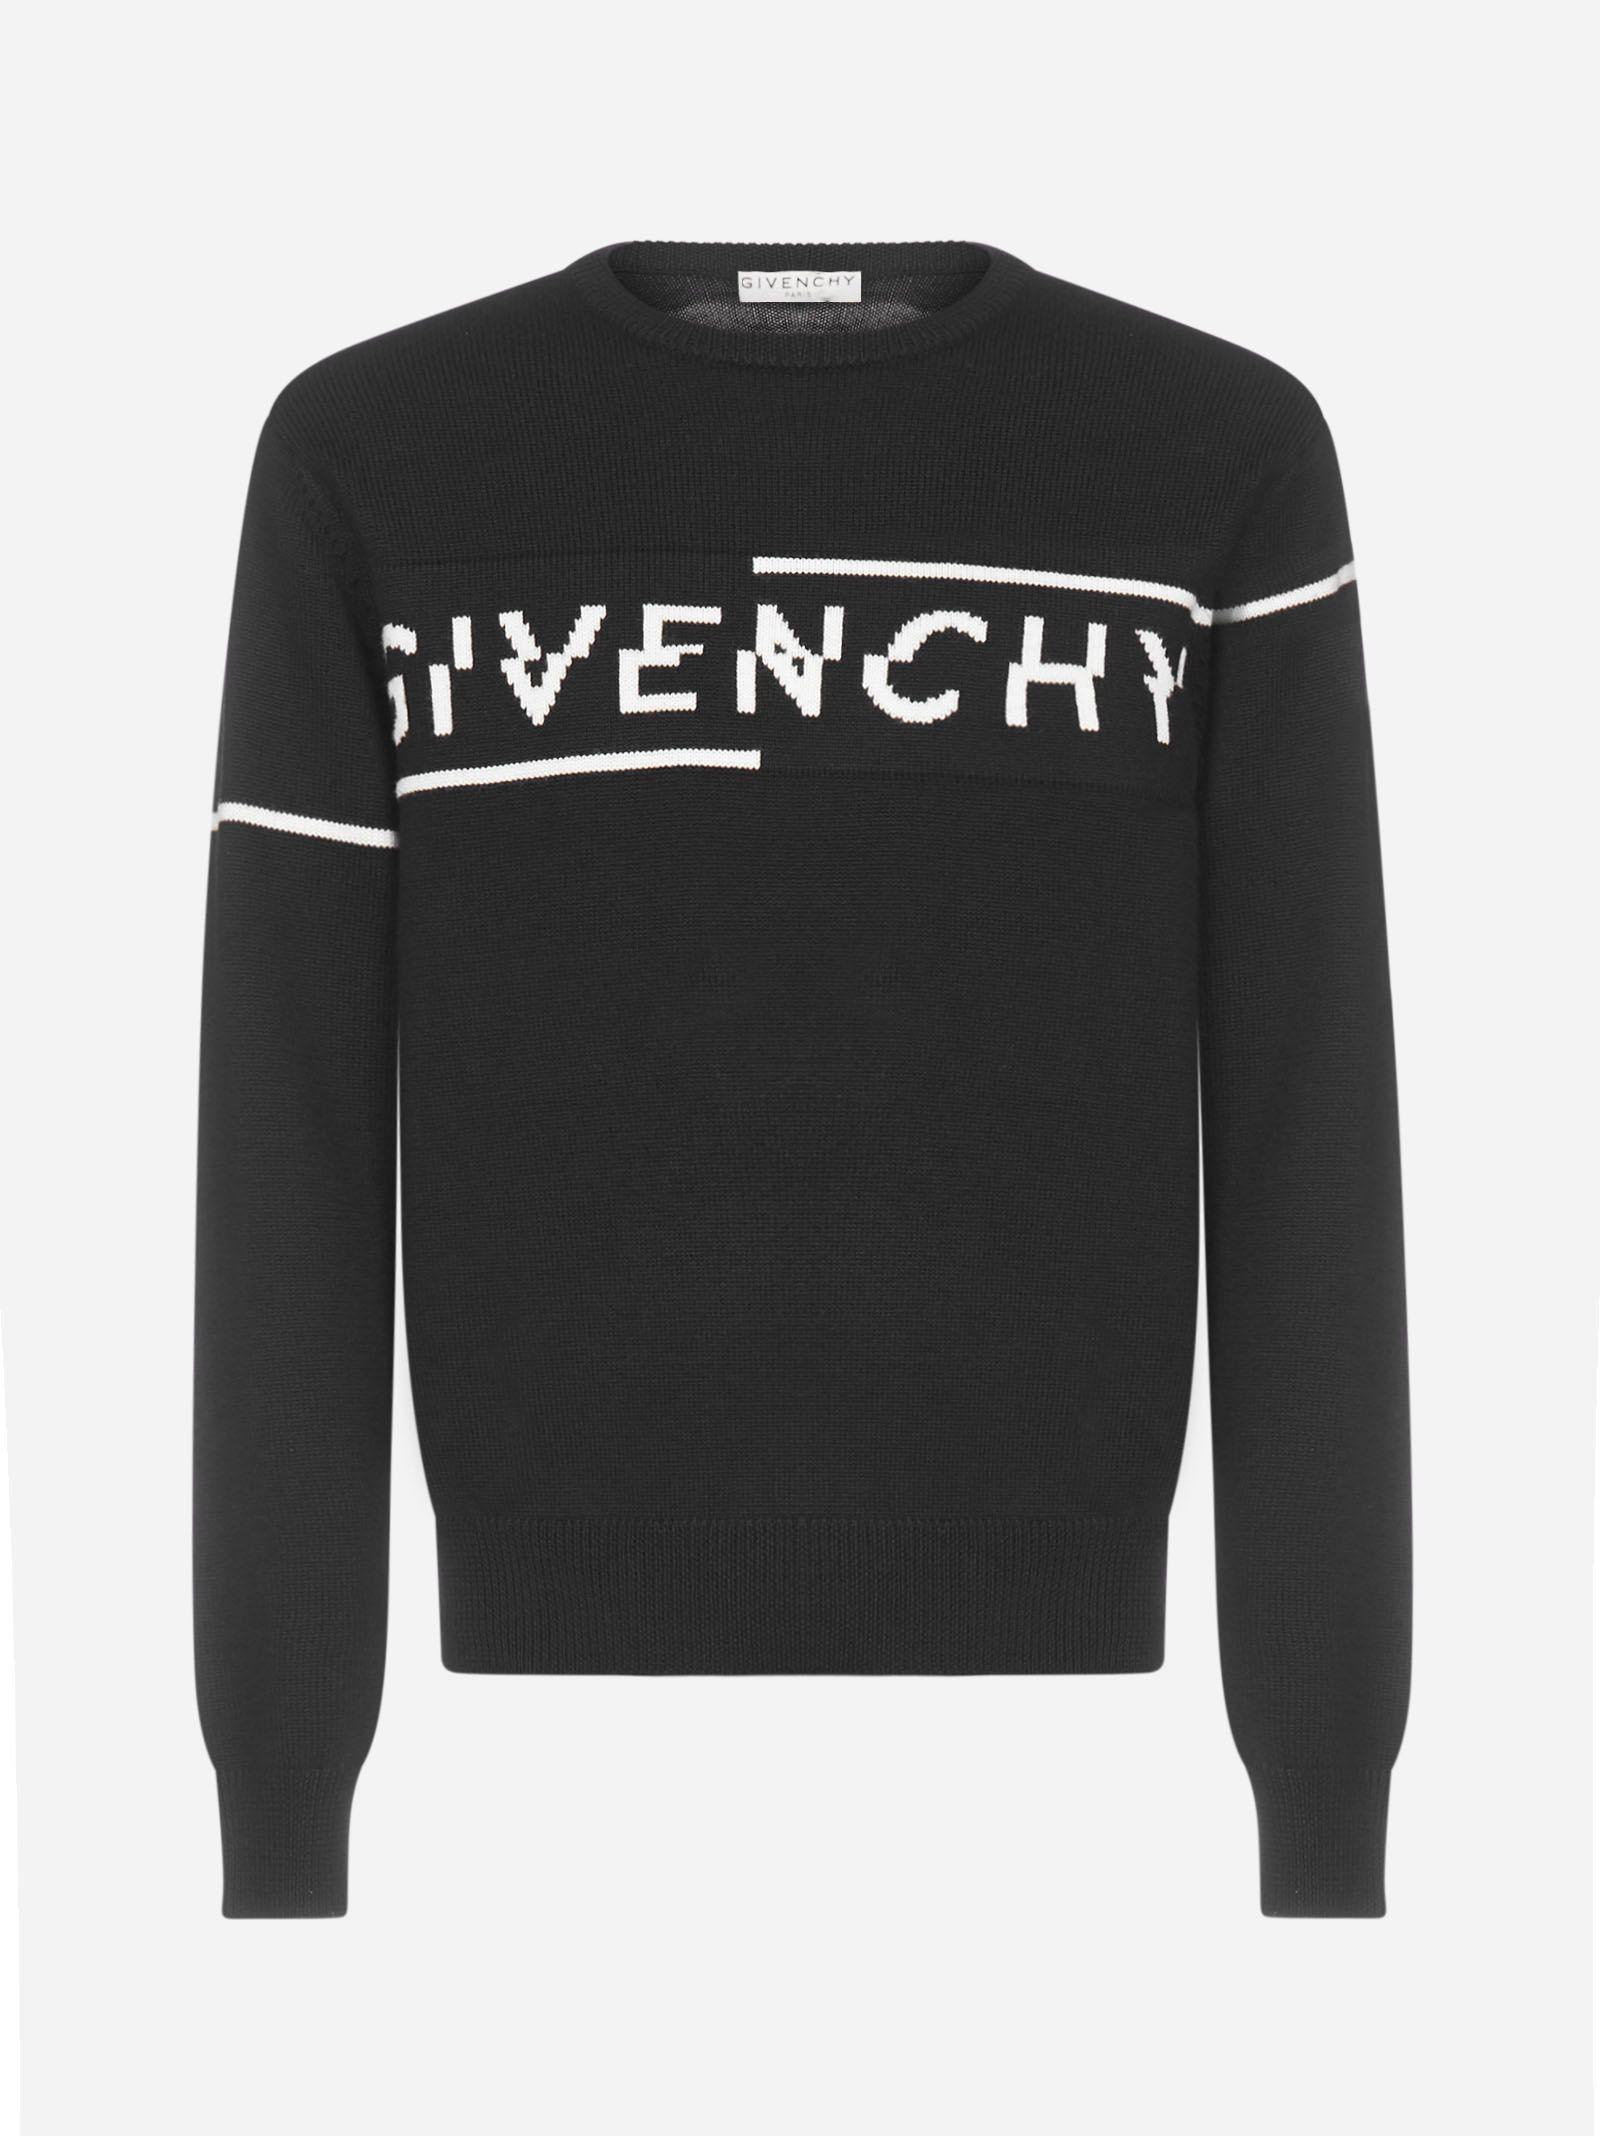 Givenchy Logo Wool Sweater in Black - White (Black) for Men - Lyst